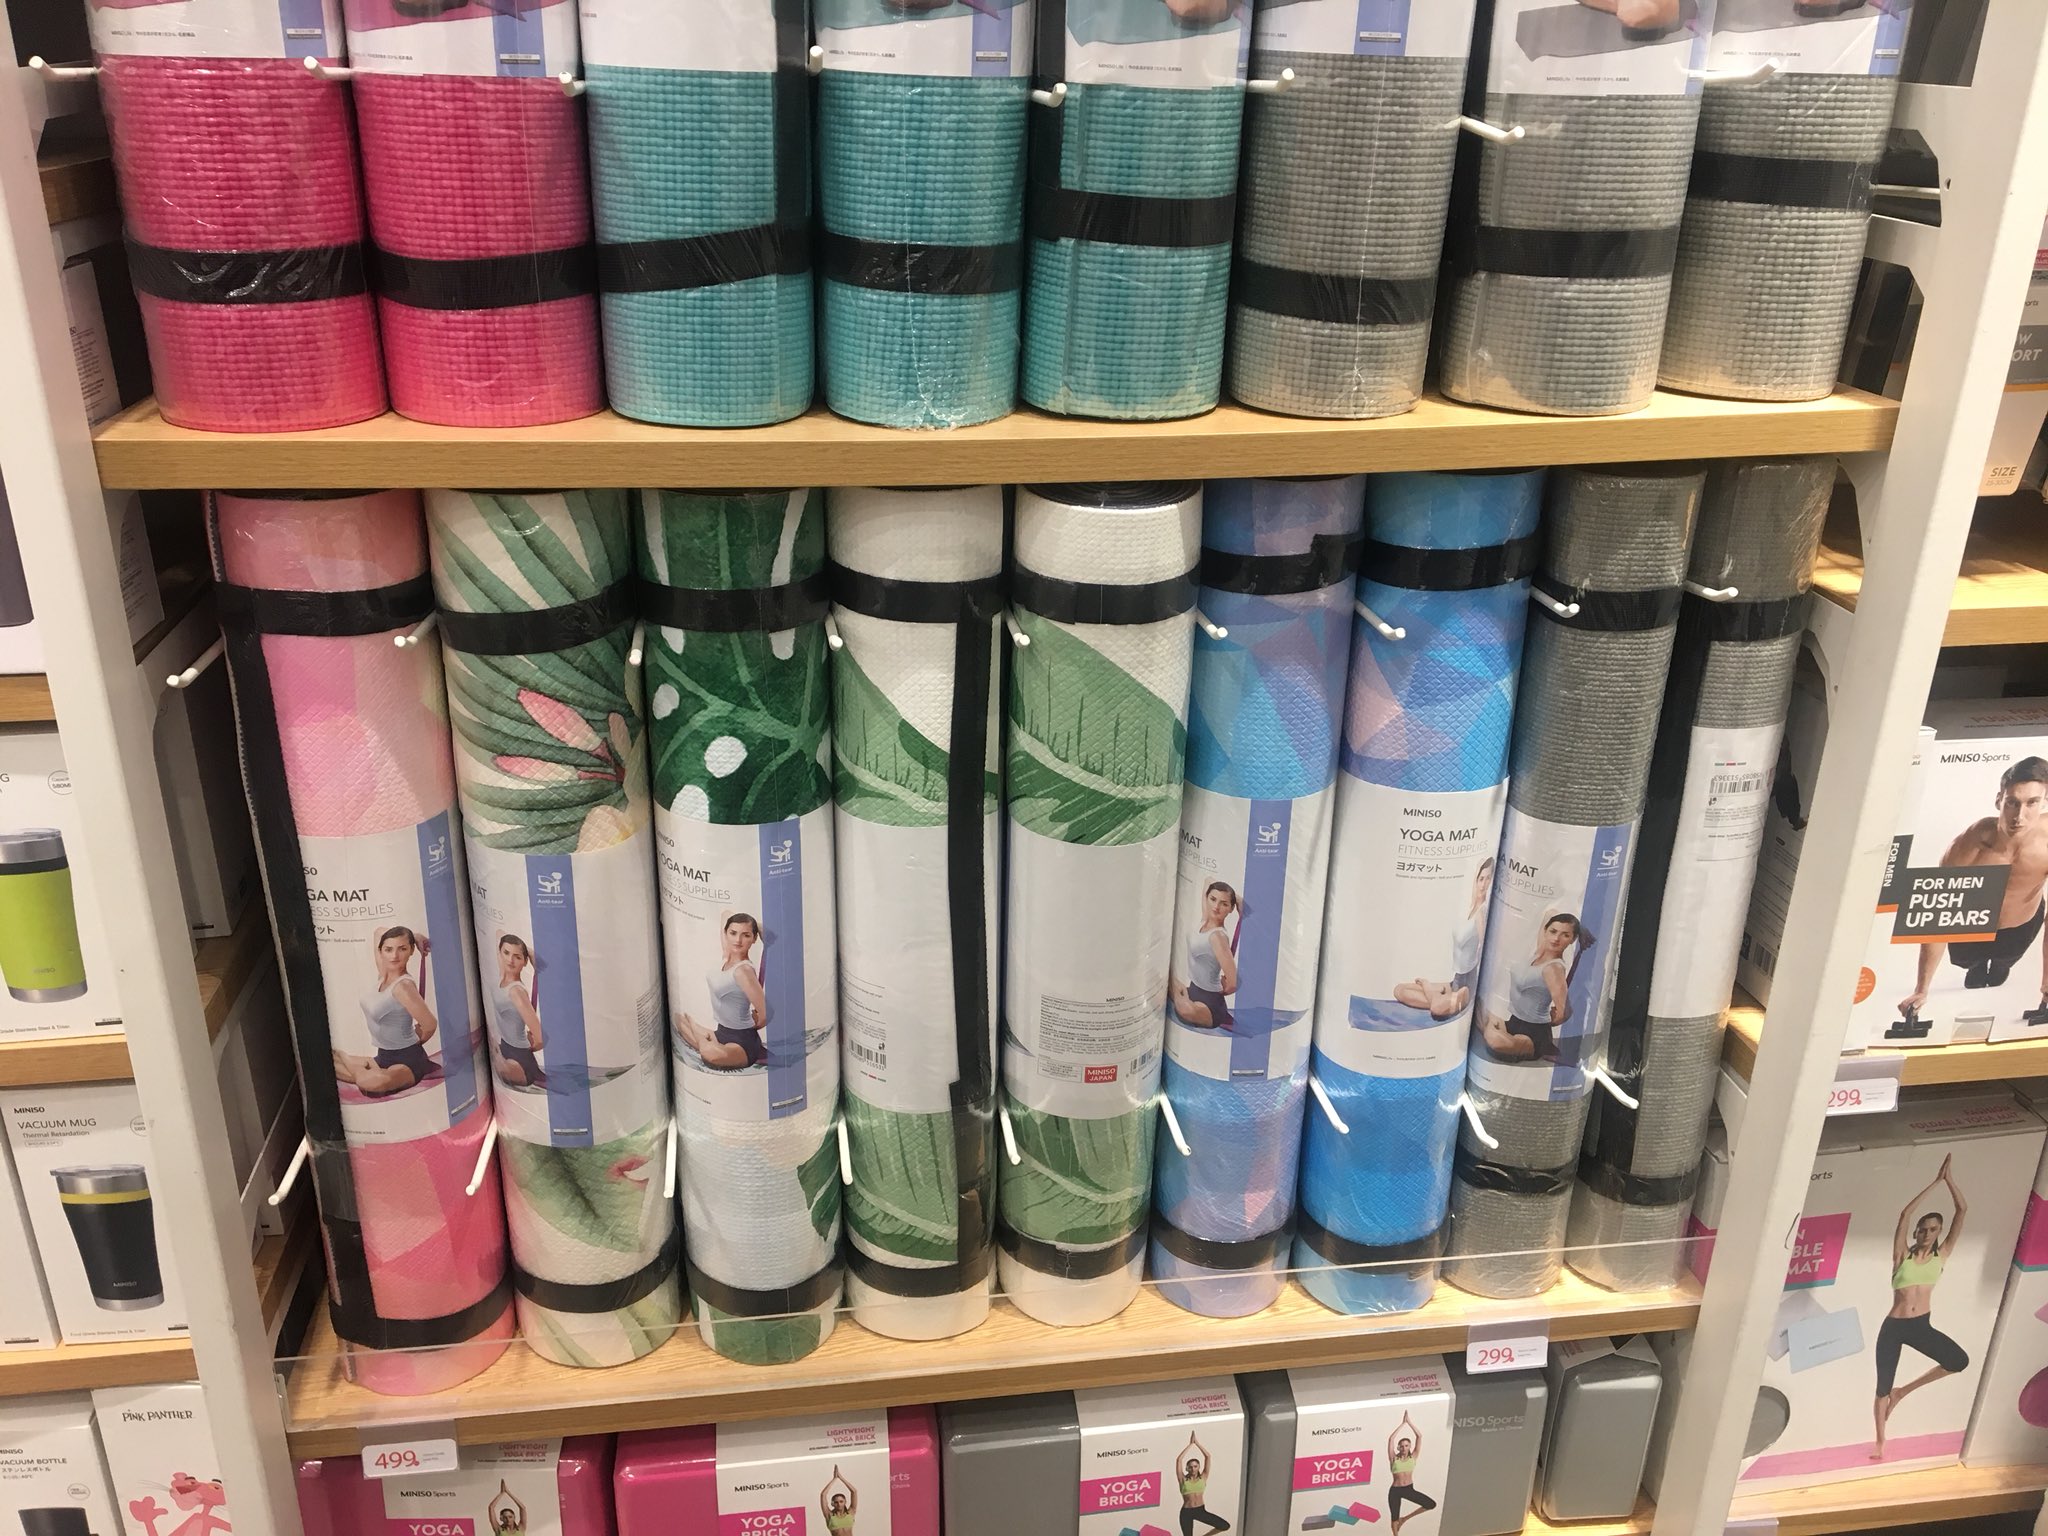 Kim Abrogena on X: Miniso is selling these cute yoga mats and i